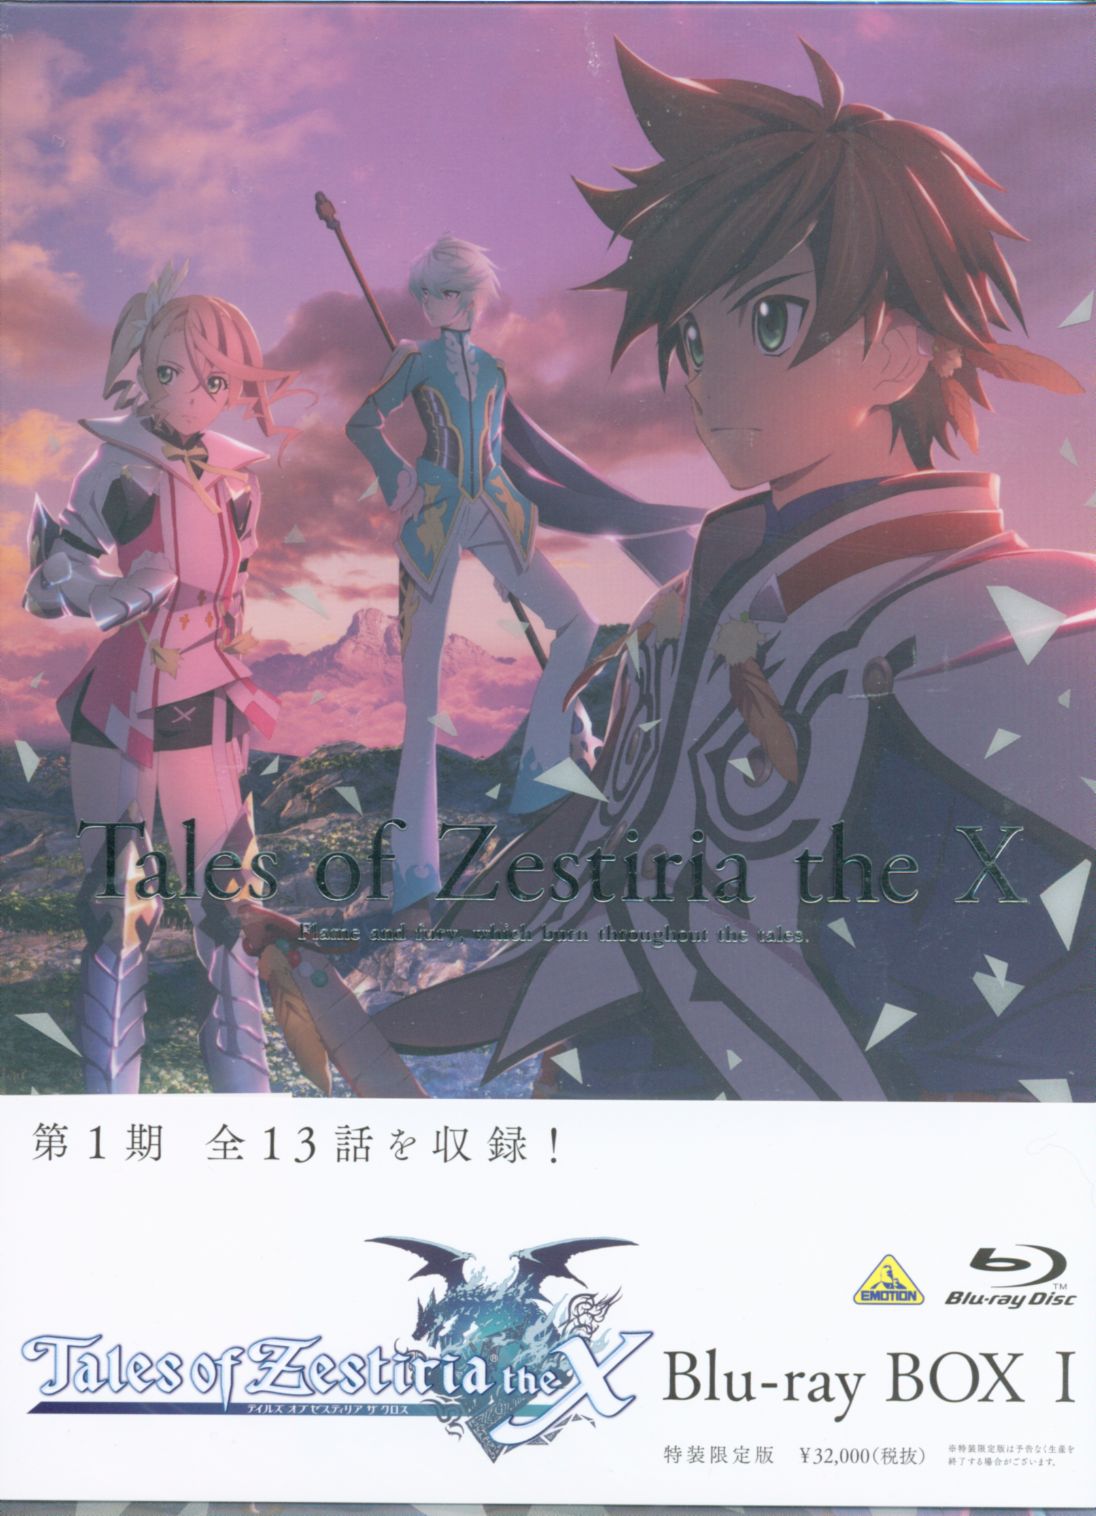 Tales of Zestiria the X Blu-Ray BOX special equipment Limited